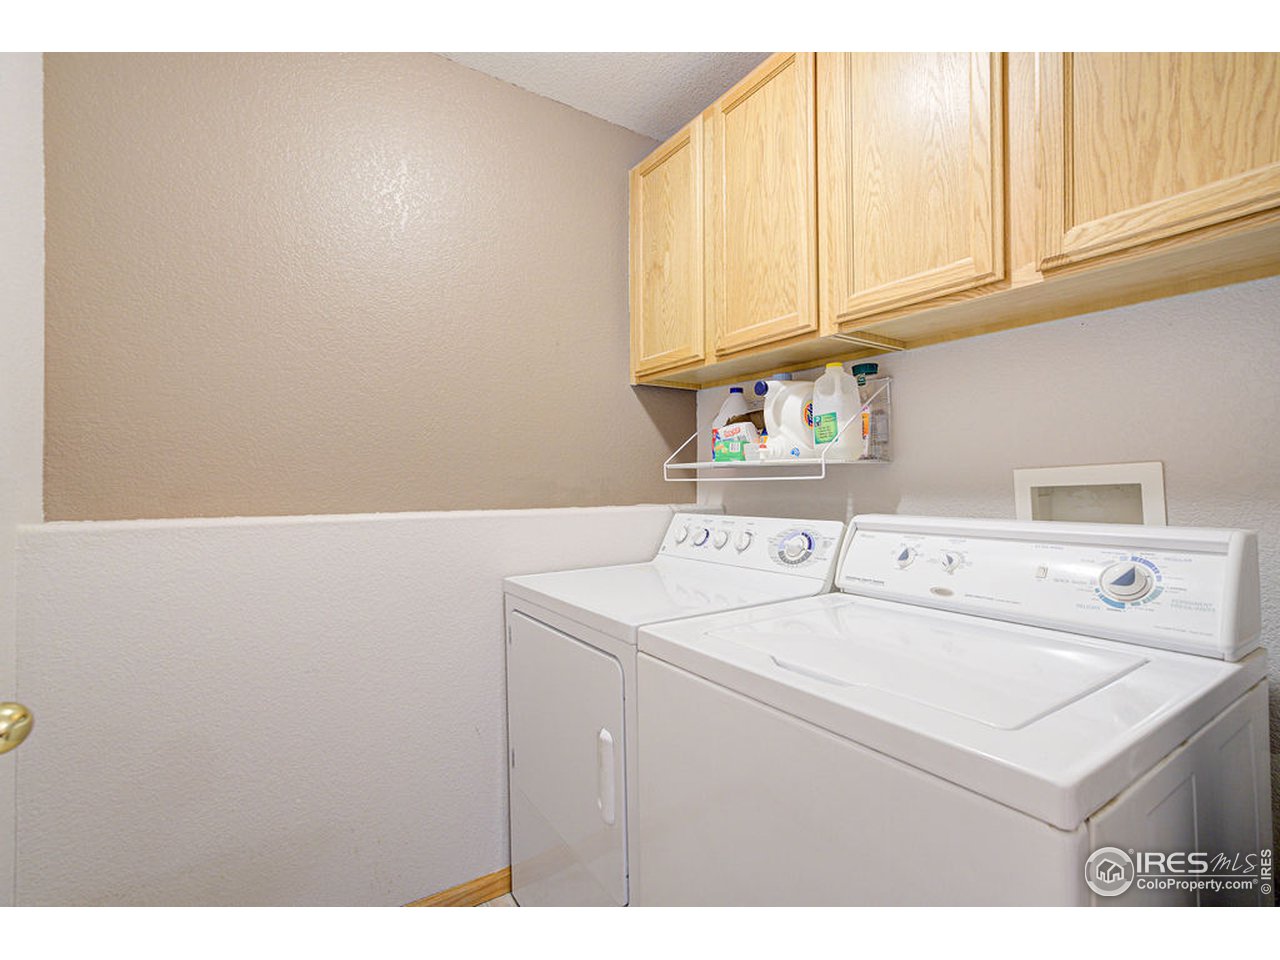 Washer/Dryer stay.  Nice closets too!